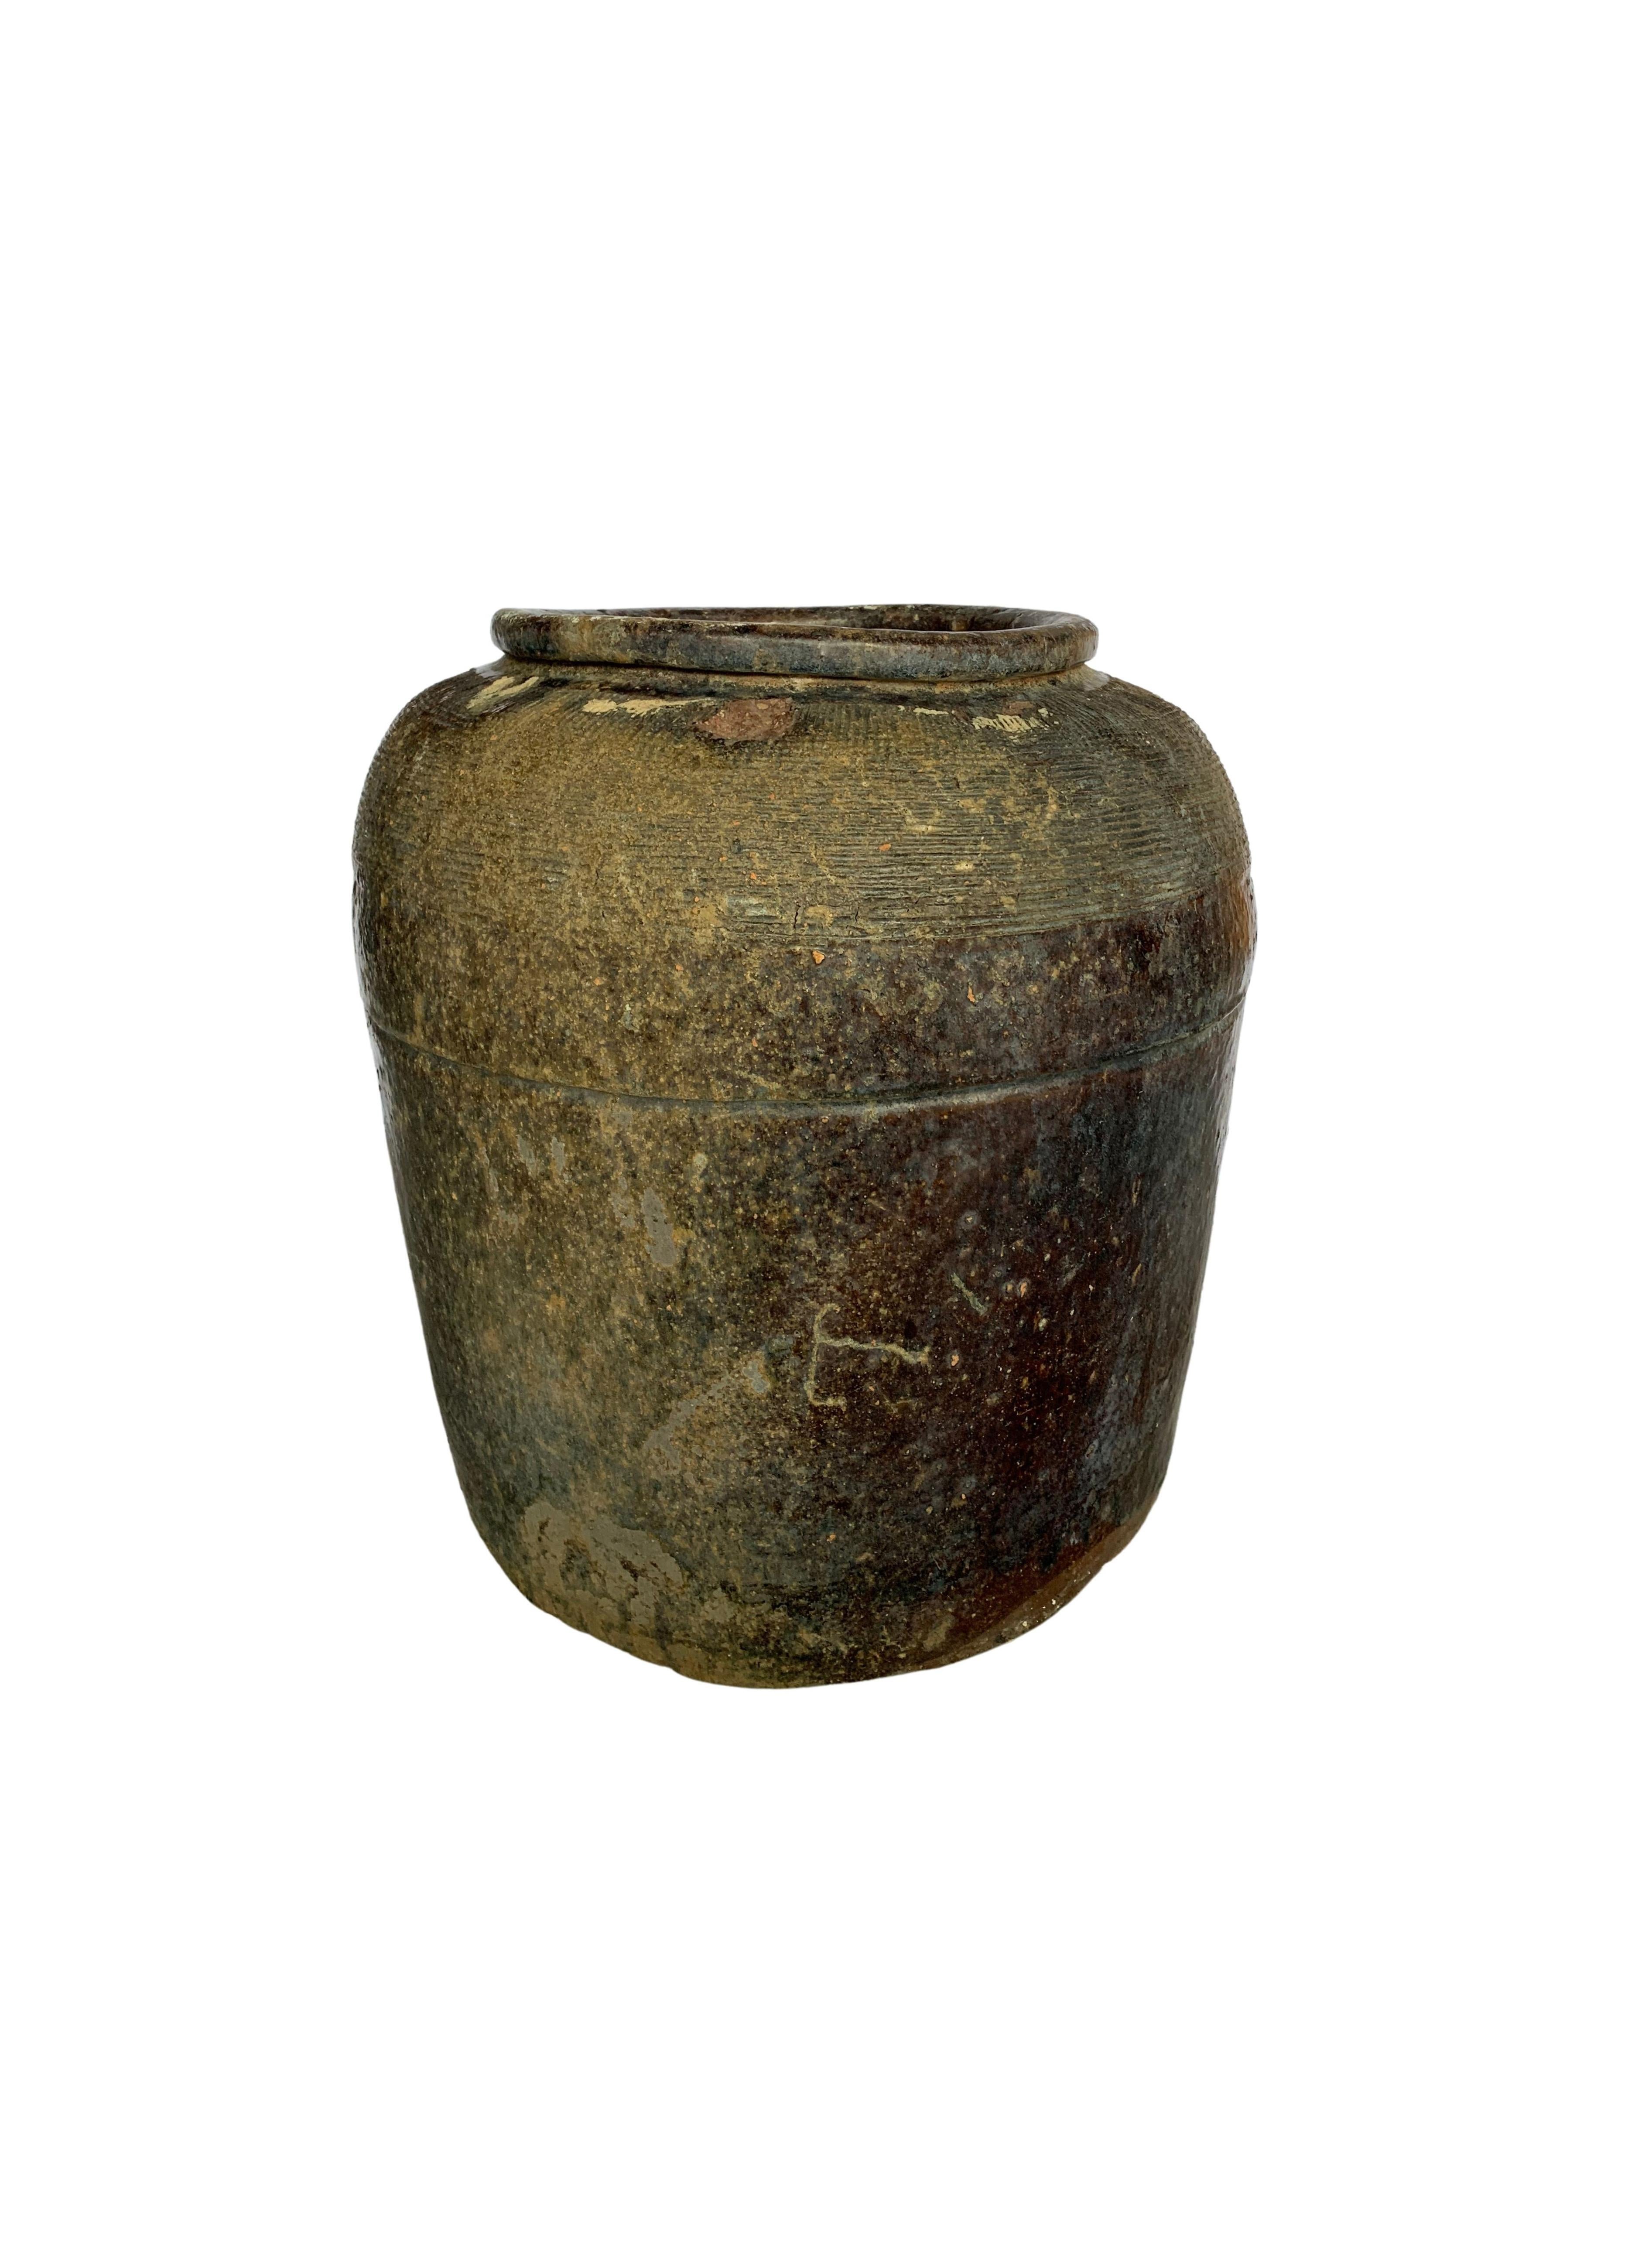 Antique Chinese Brown Glazed Ceramic Salty Egg Jar, c.1900 In Good Condition For Sale In Jimbaran, Bali